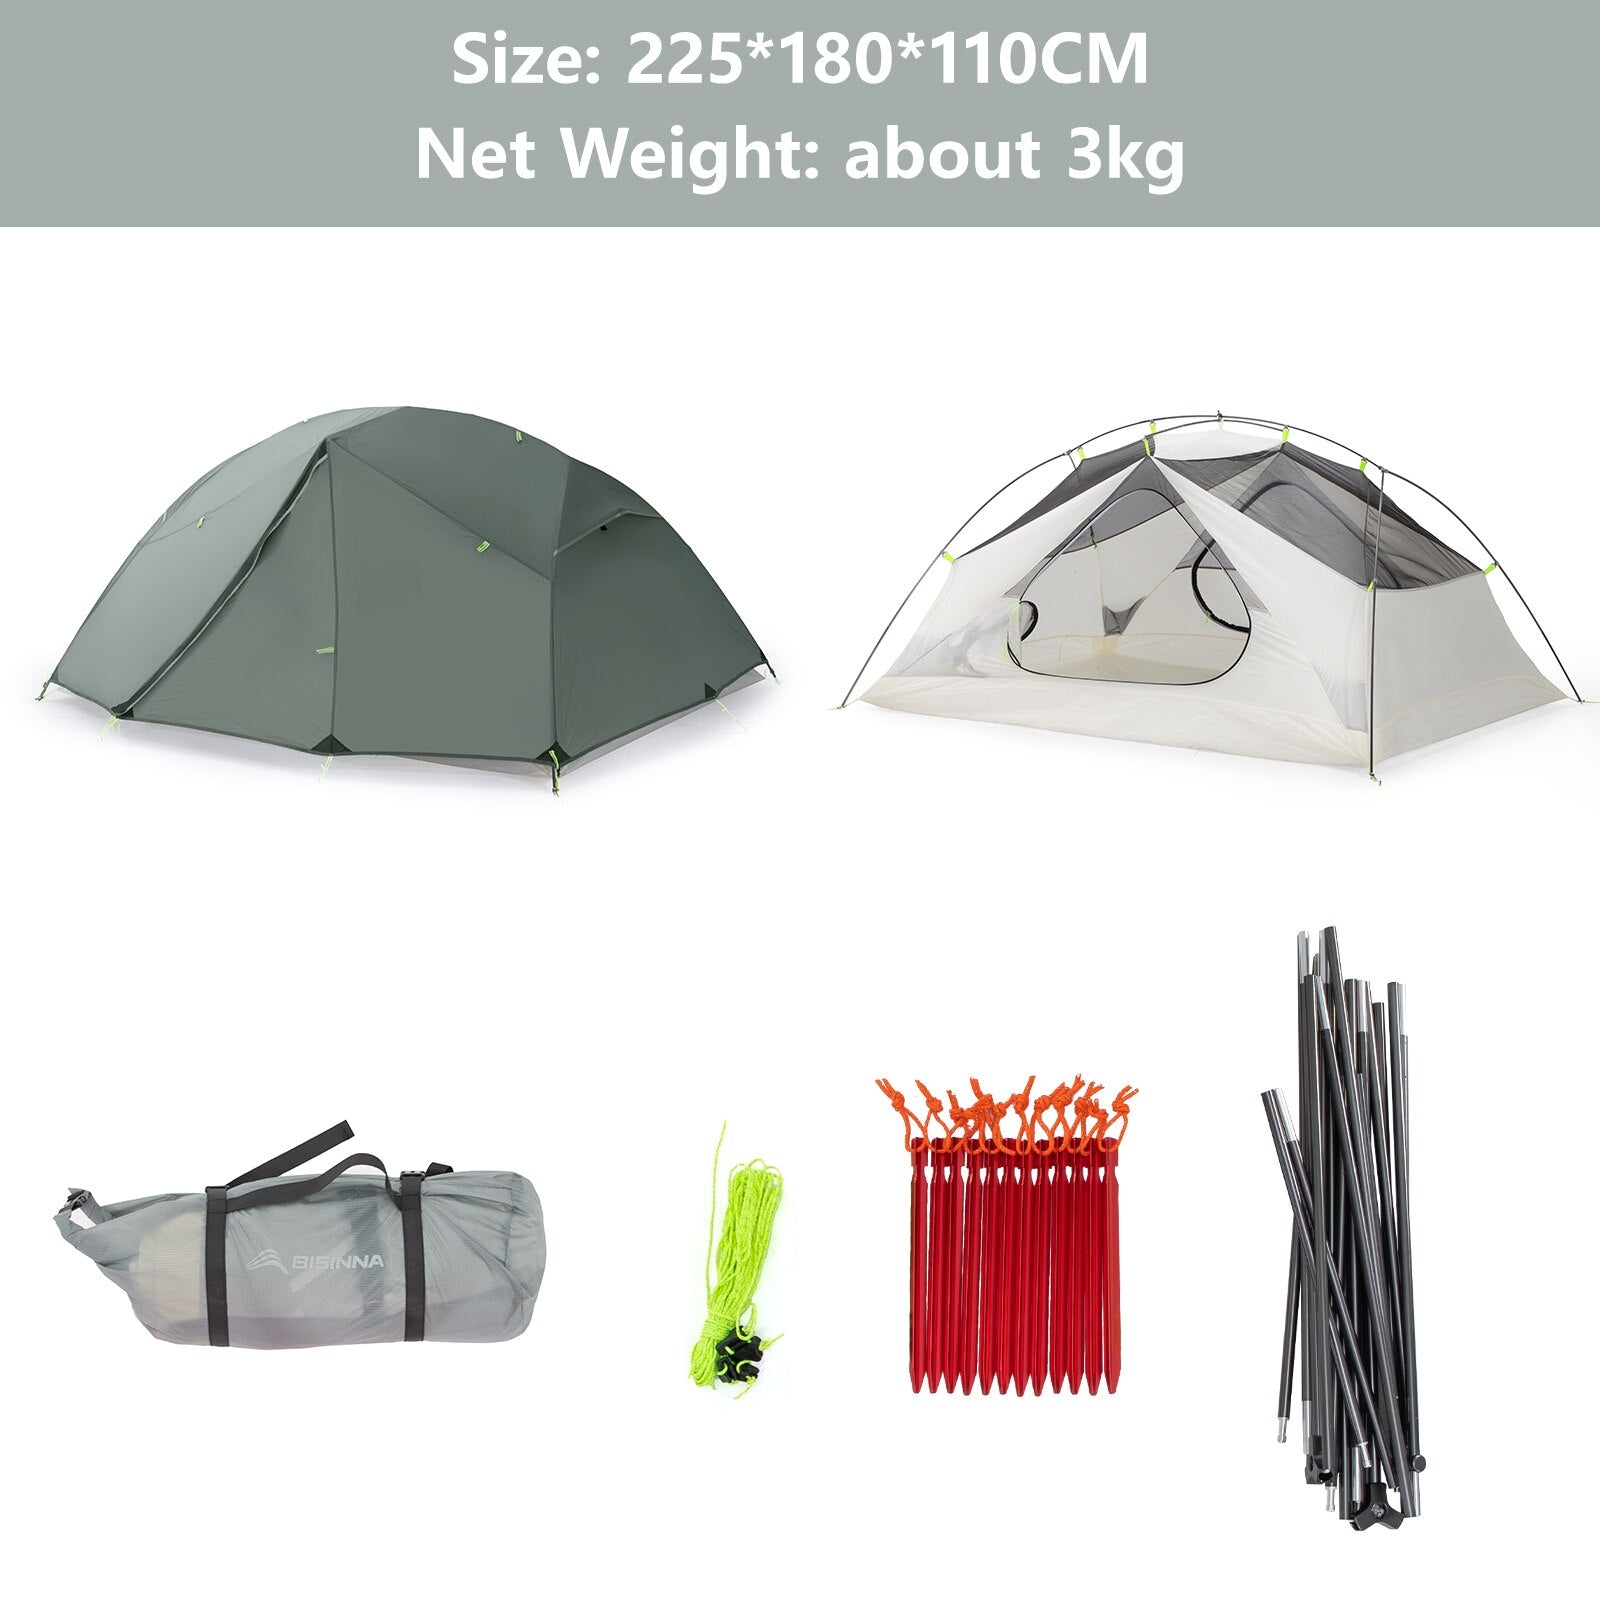 2 Persons Camping Tent Ultralight Nylon Double Layer Waterproof Backpacking Tent for Hiking